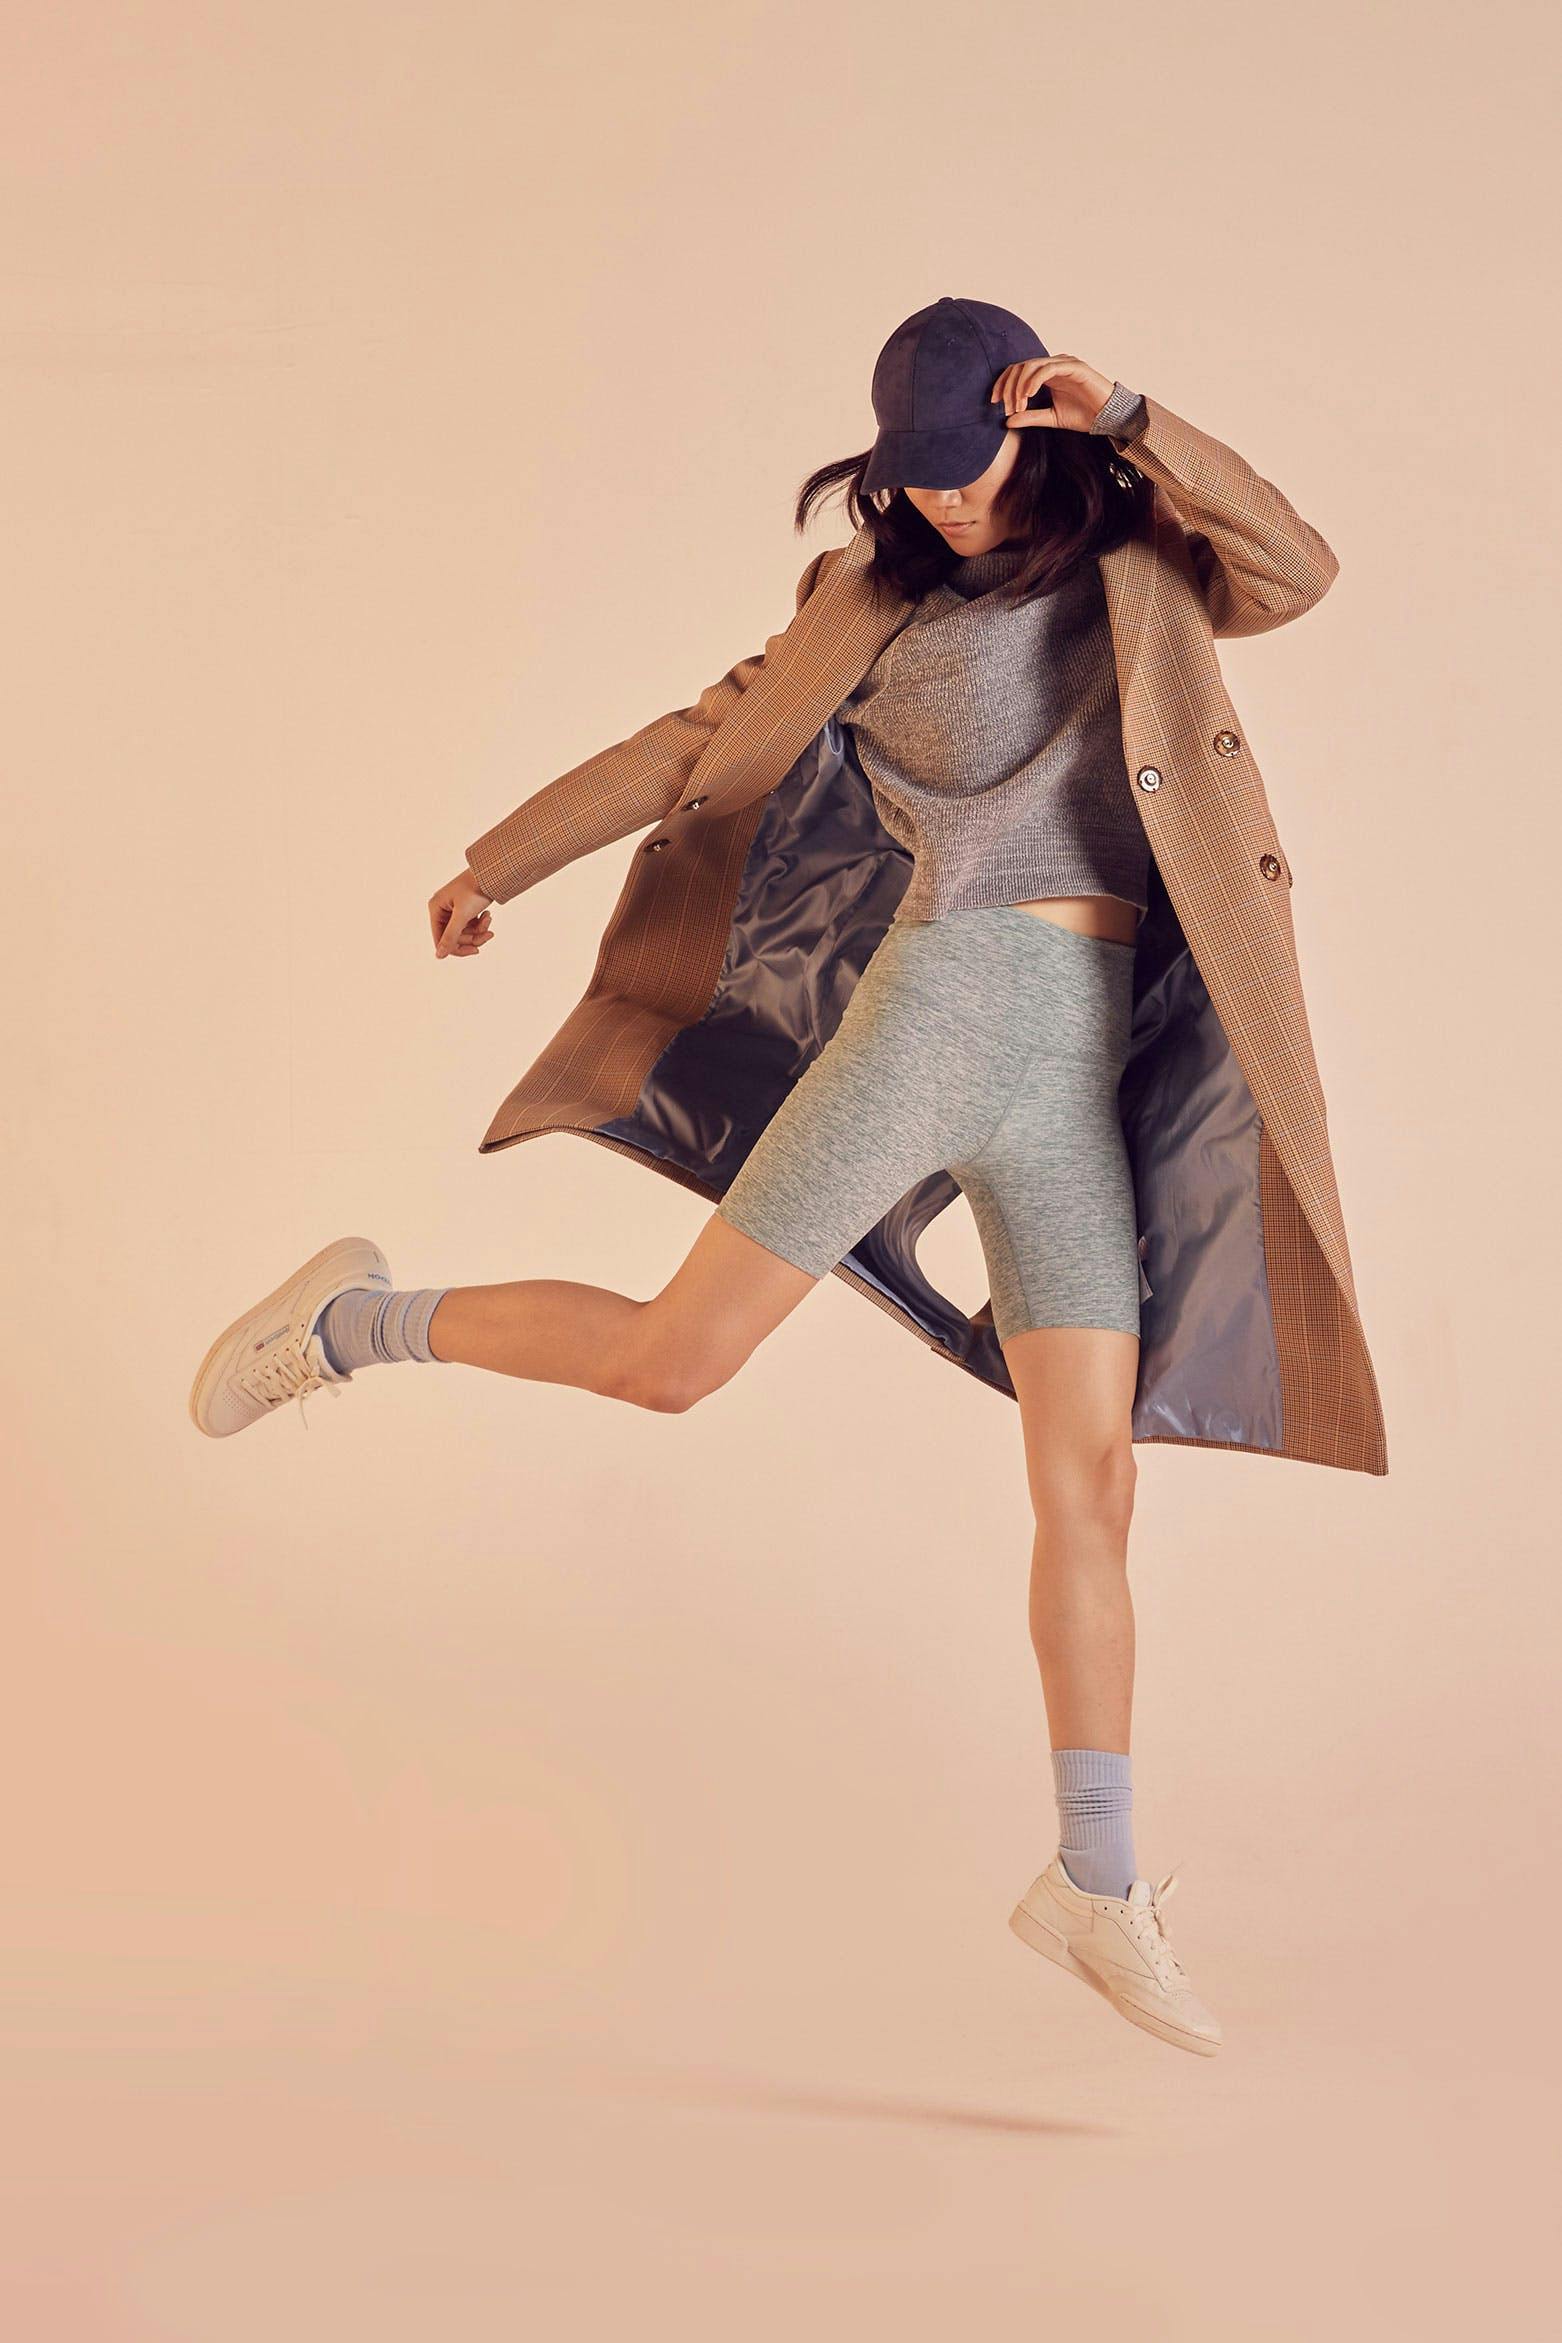 fashion model photography with a model in an action jump wearing bike shorts and a beige trench coat 